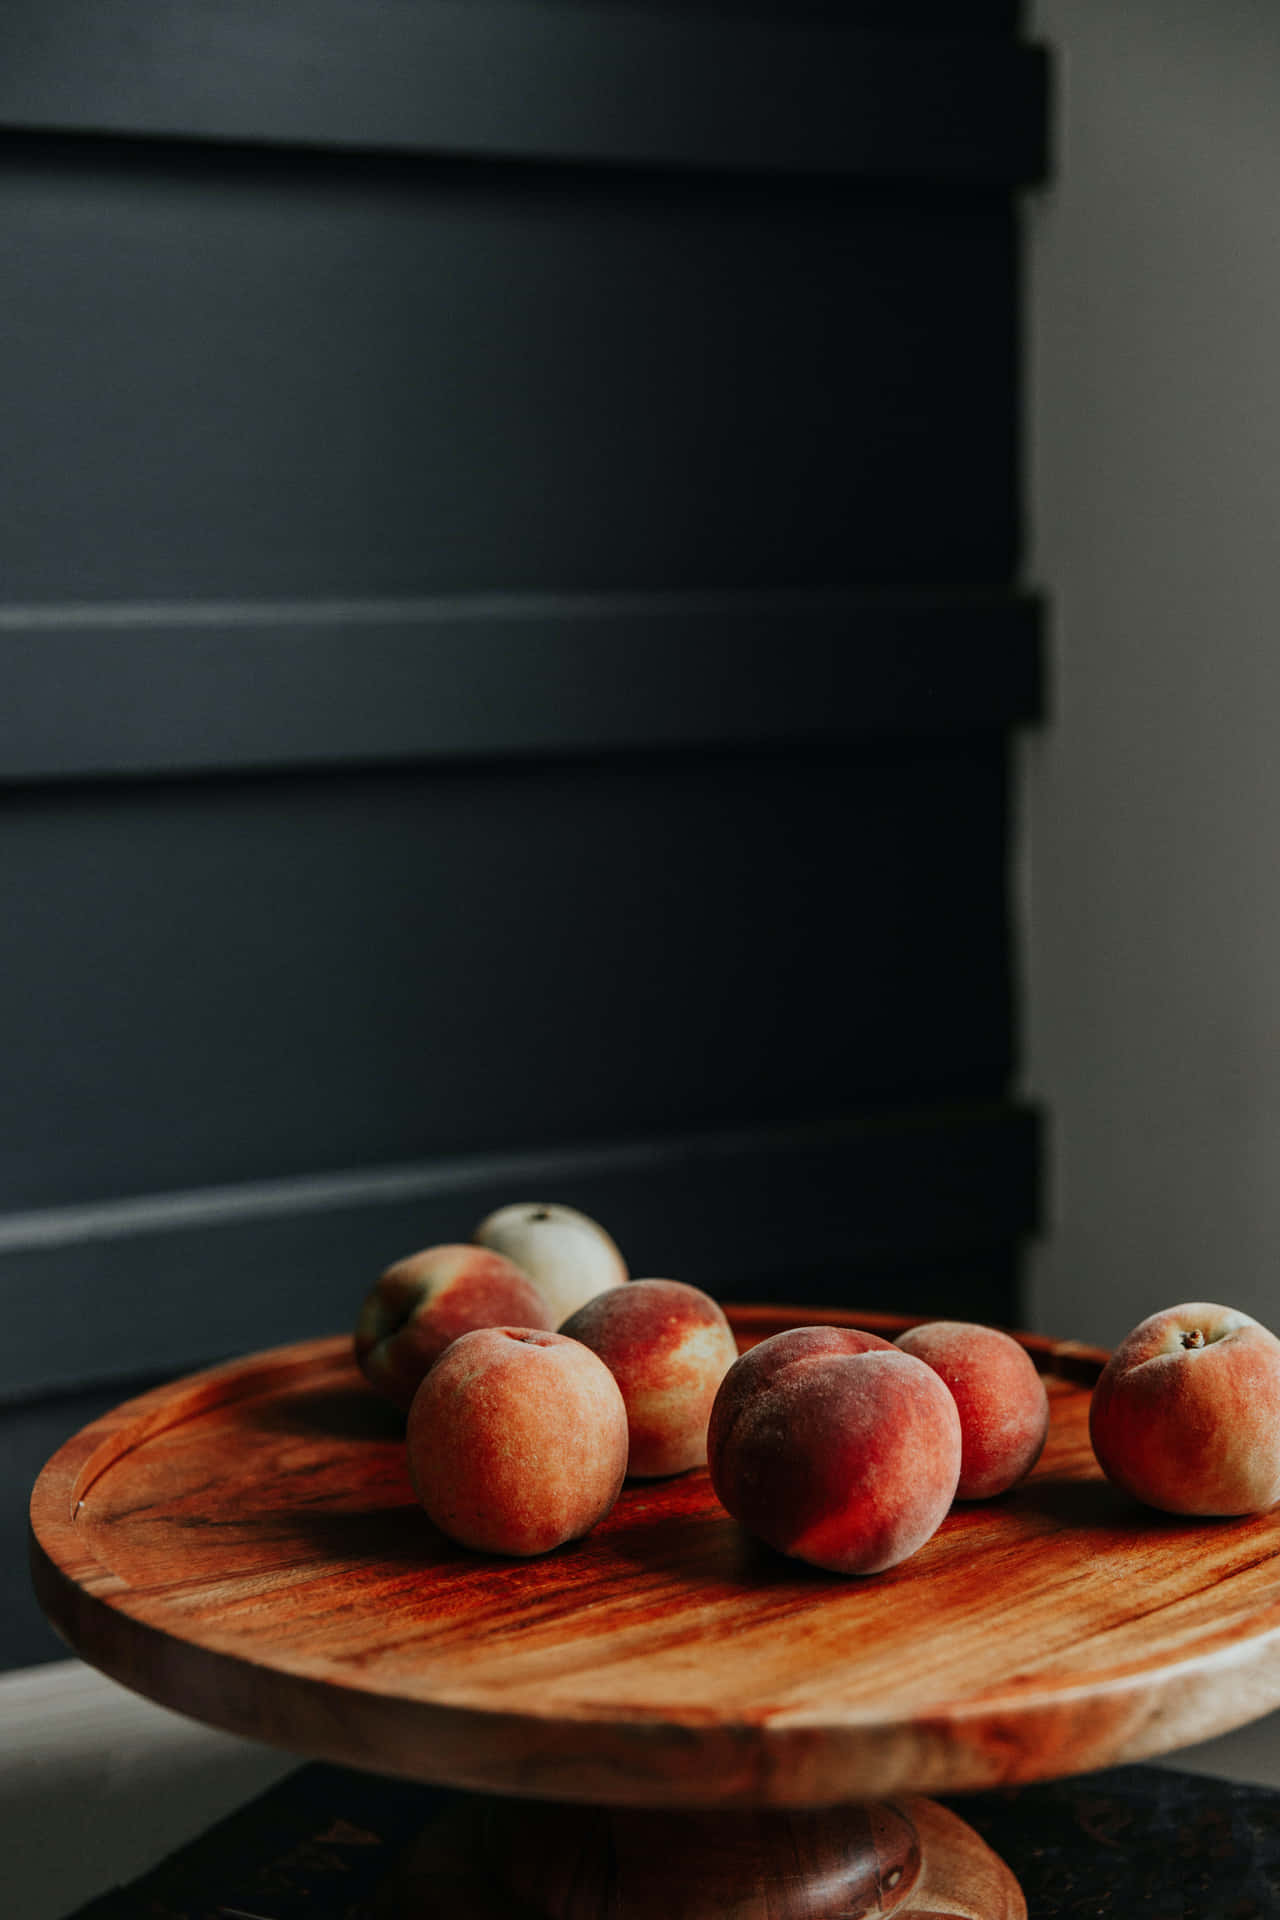 A Wooden Plate With Peaches On It